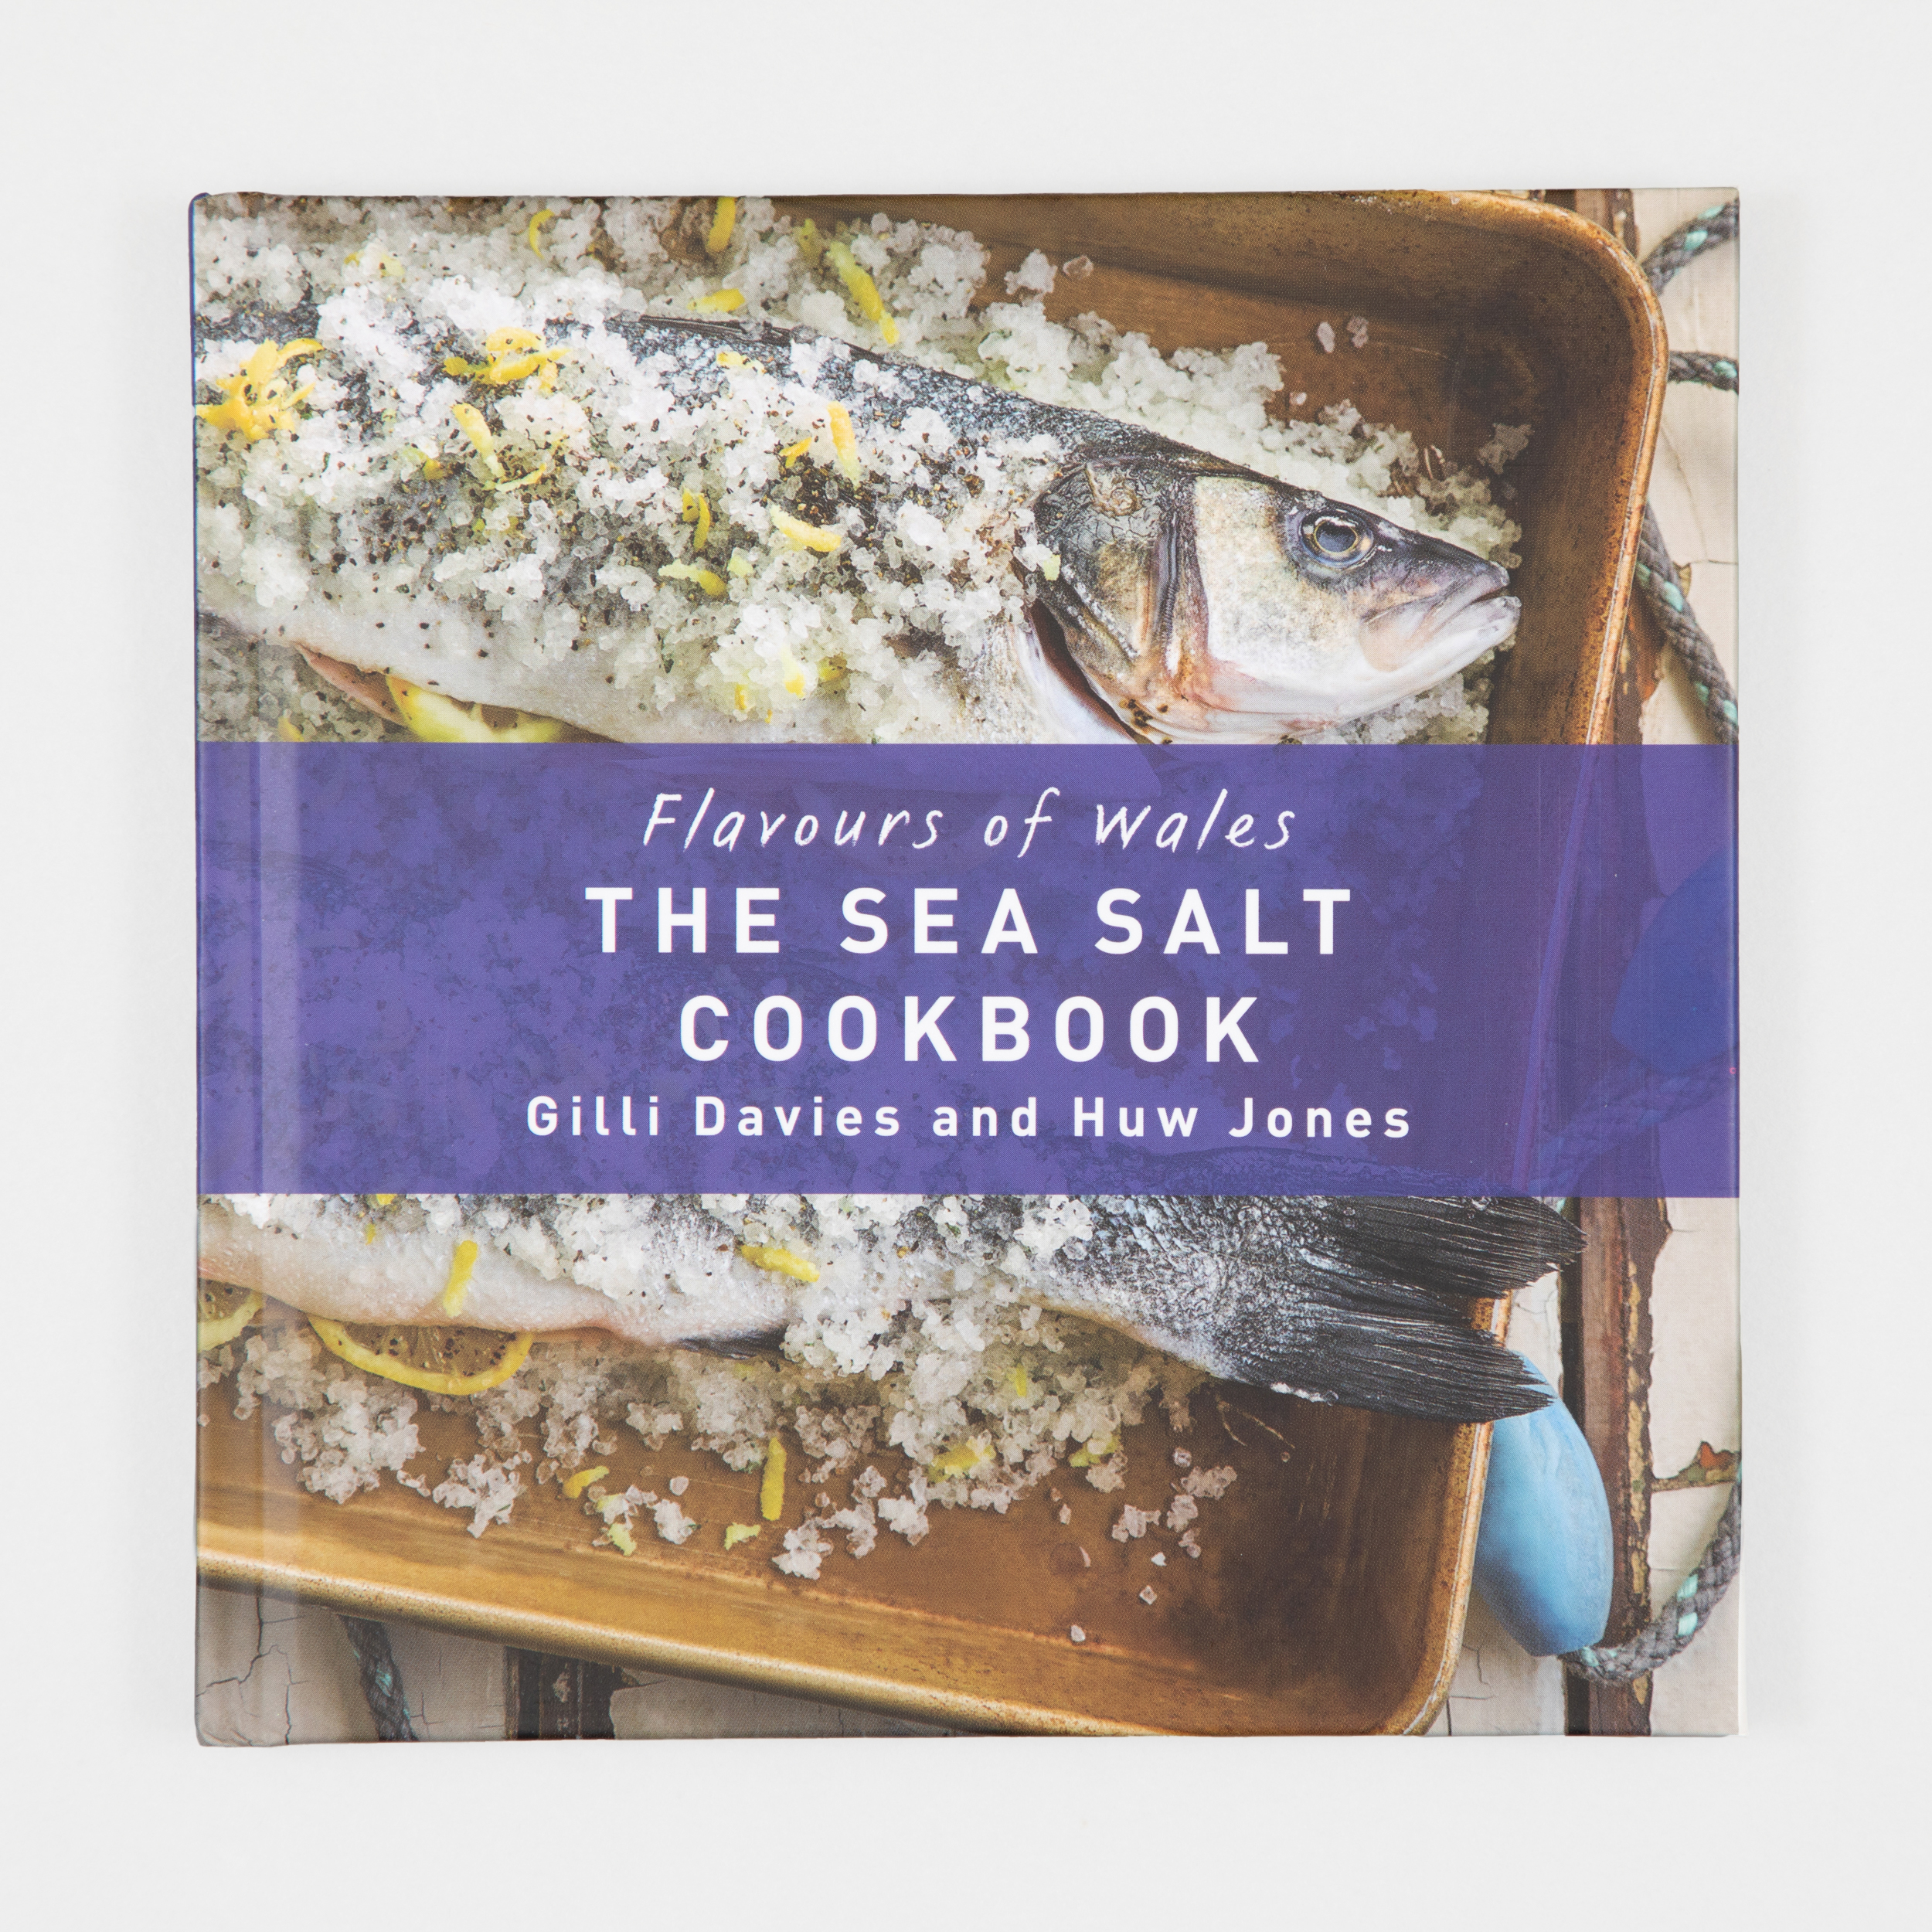 Bookspeed The Sea Salt Welsh Cookbook - Flavours Of Wales